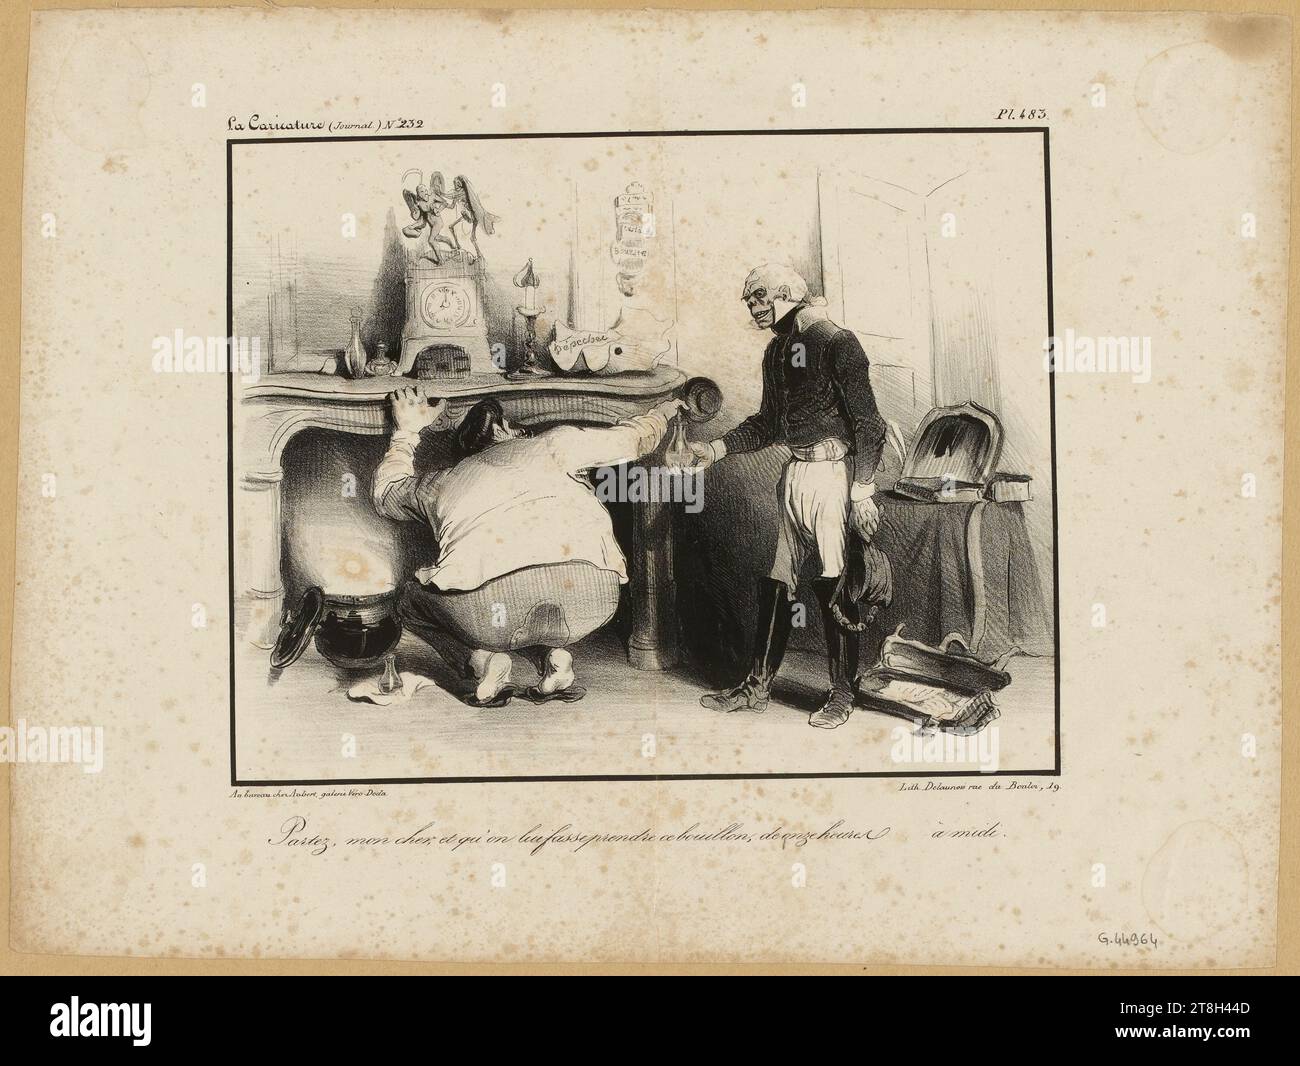 Pl. 483, La caricature (journal) n°232, Go, my dear, and let him take this broth, from eleven o'clock to noon, Draftsman-lithographer, Delaunois, Nicolas Louis, Printer-lithographer, Aubert, Publisher, Around 1830, Print, Graphic Arts, Print, Lithography, Dimensions - Work: Height: 27.4 cm, Width: 36 cm, Dimensions - Mounting:, Height: 50 cm, Width: 32.5 cm Stock Photo